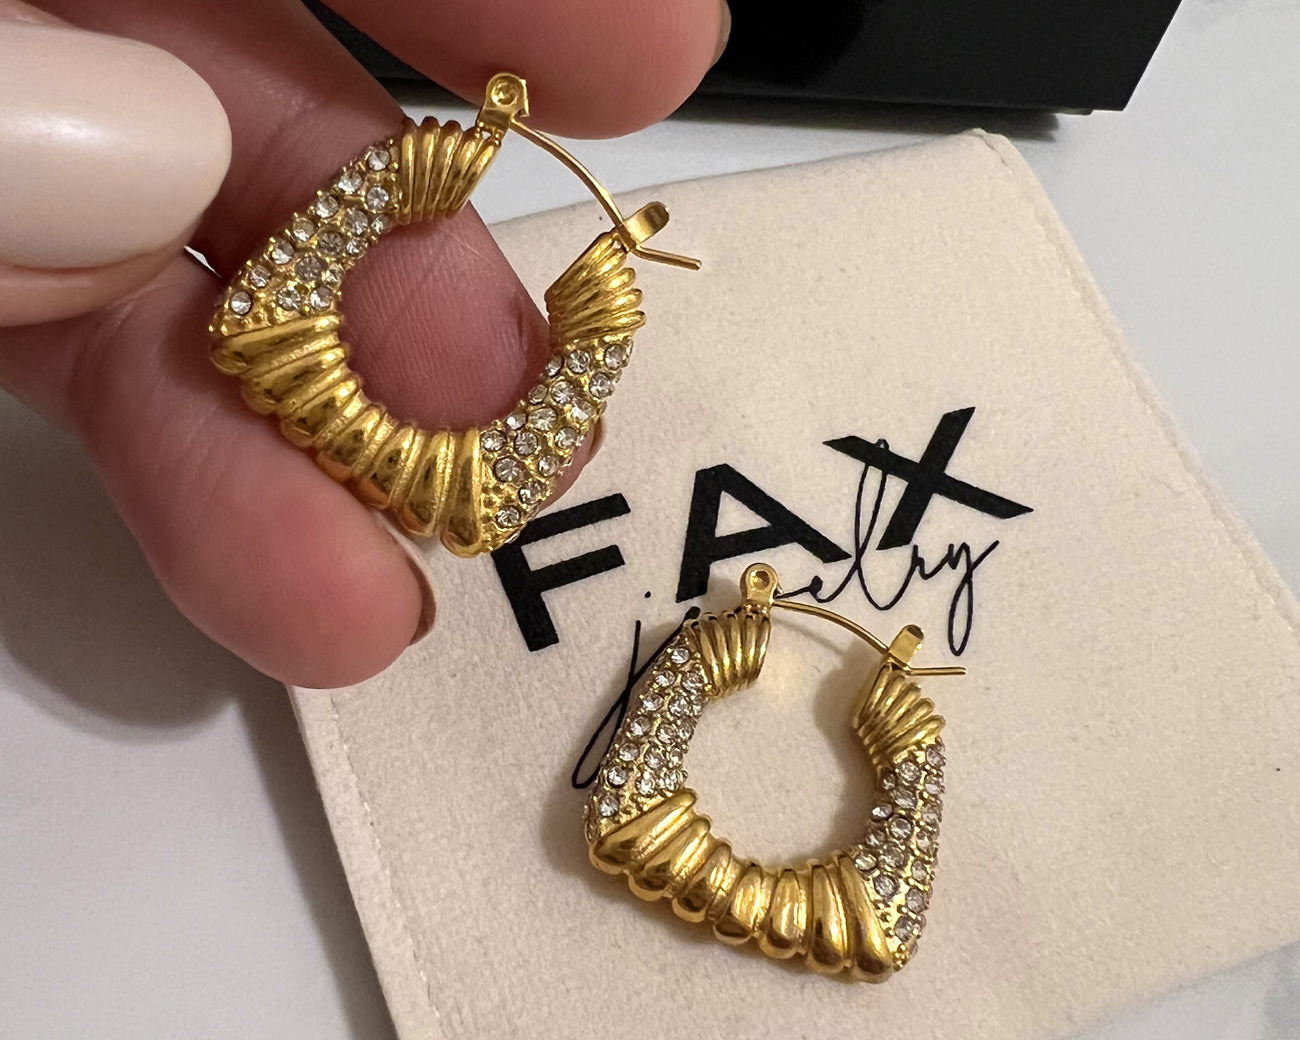 FAX Jewelry | 'Cleo' Square Hoop Earrings | Latch Back | Emerald Green Zircon Stones Against 18 karat gold plated stainless steel | Model View